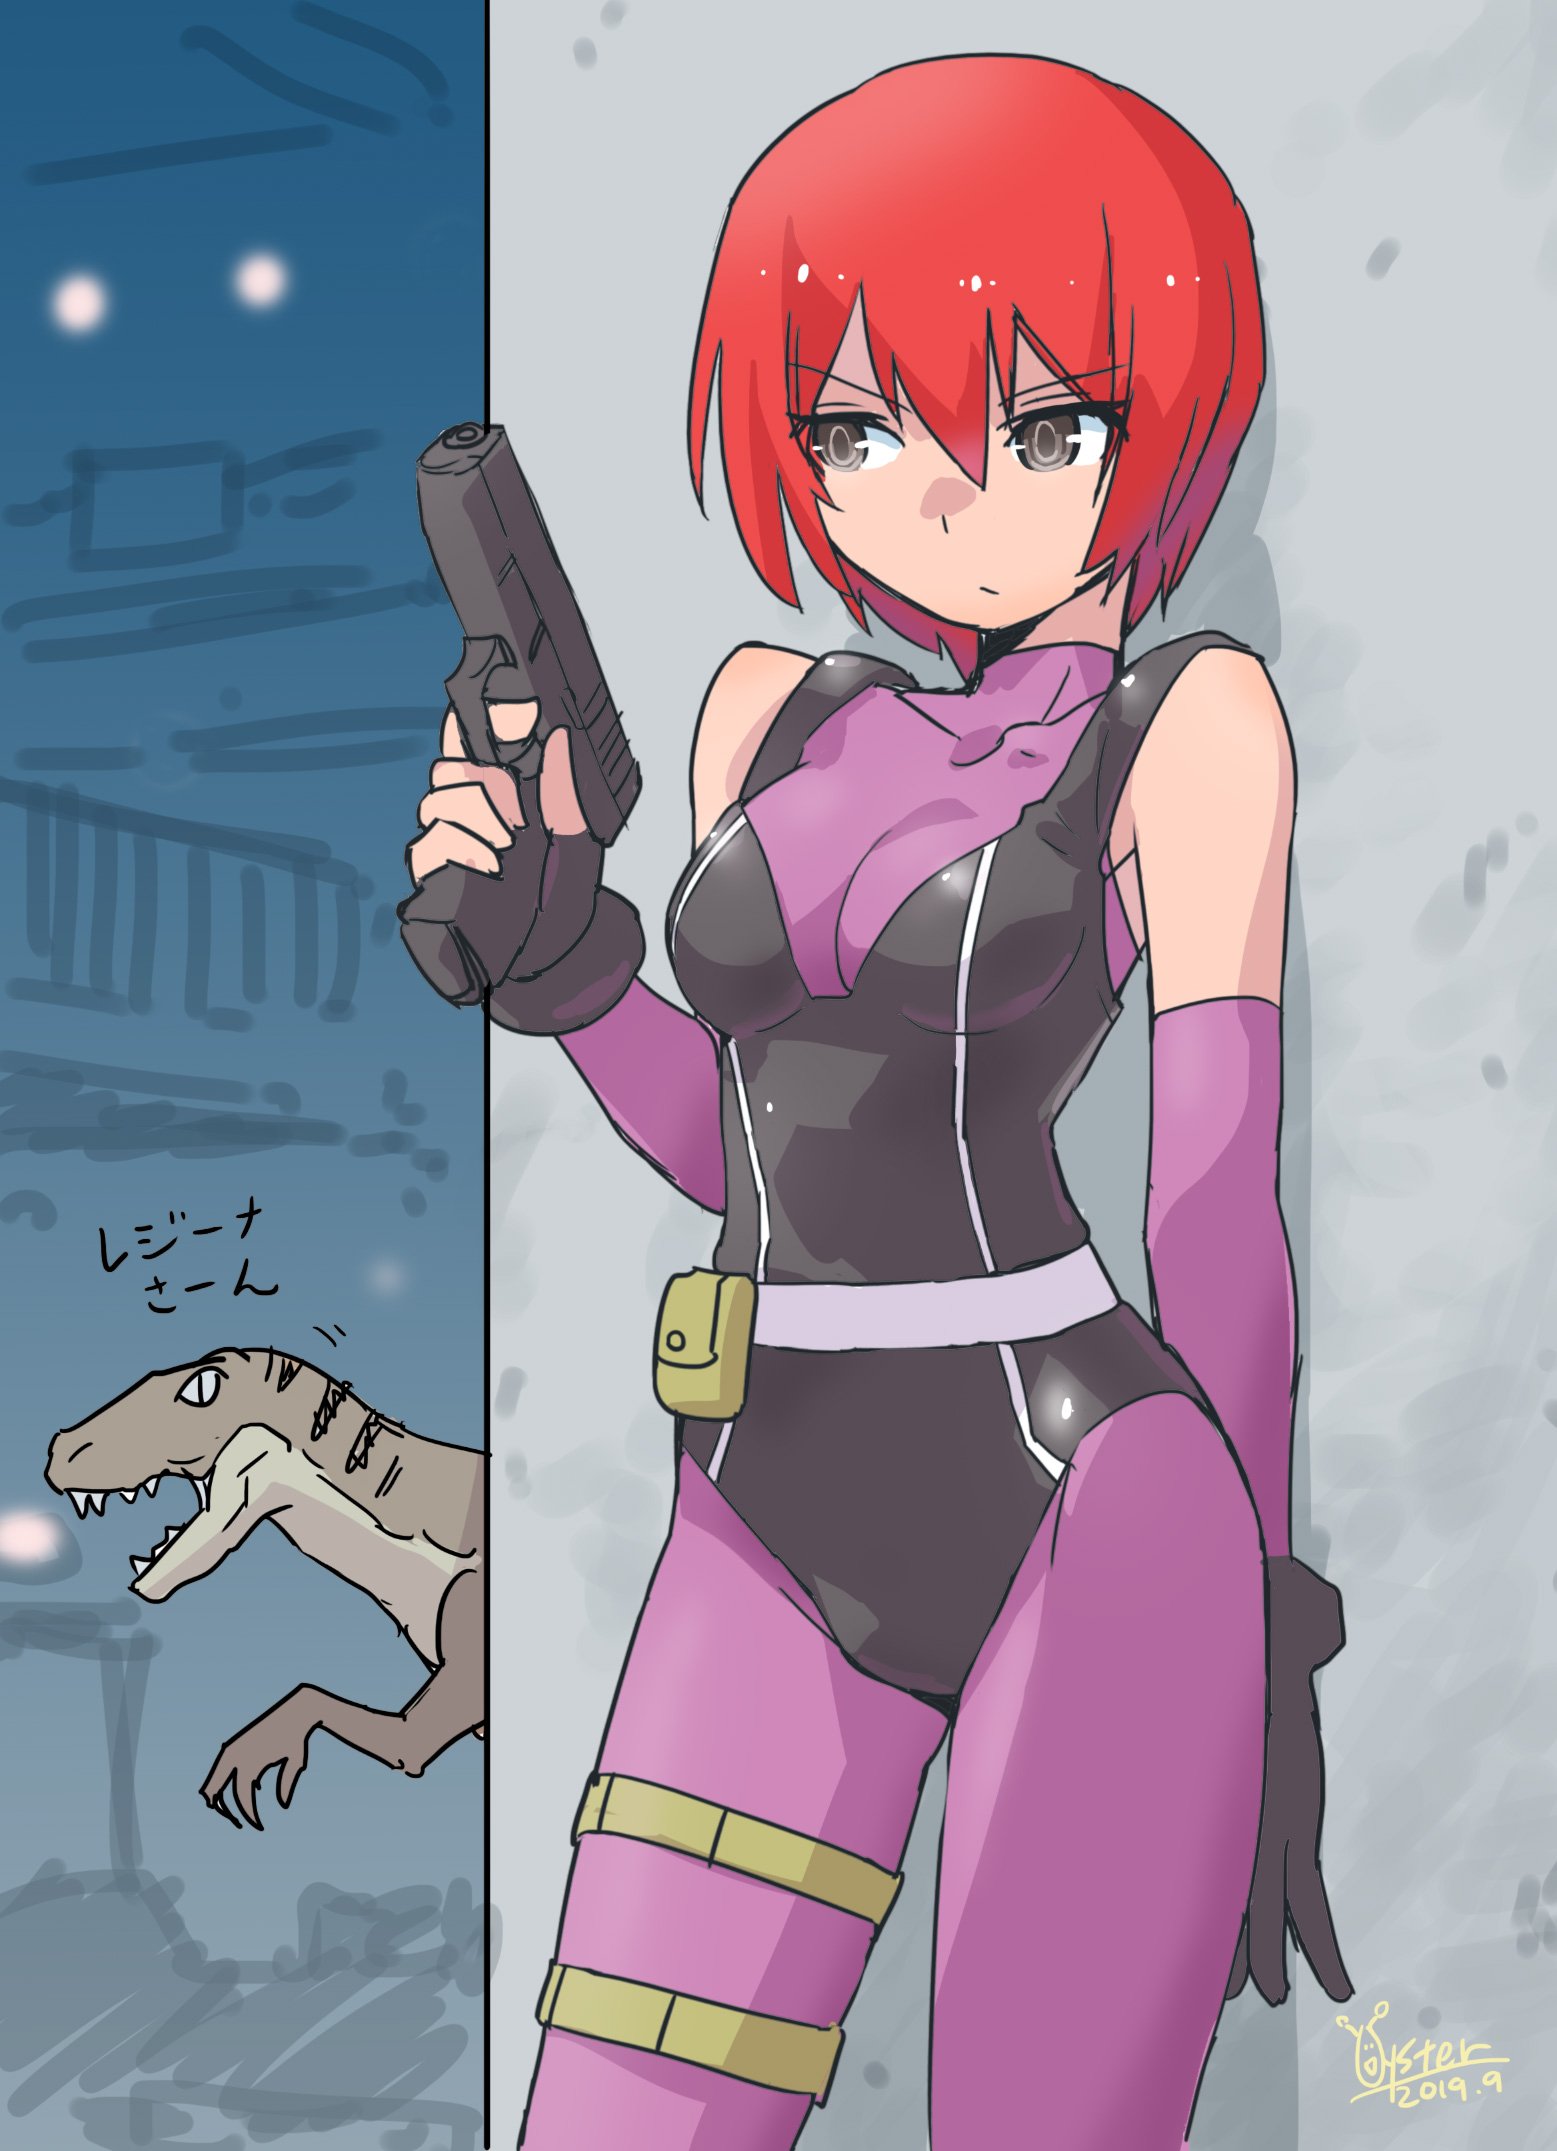 Let's just talk about what a fun and radical game Dino Crisis is inste...